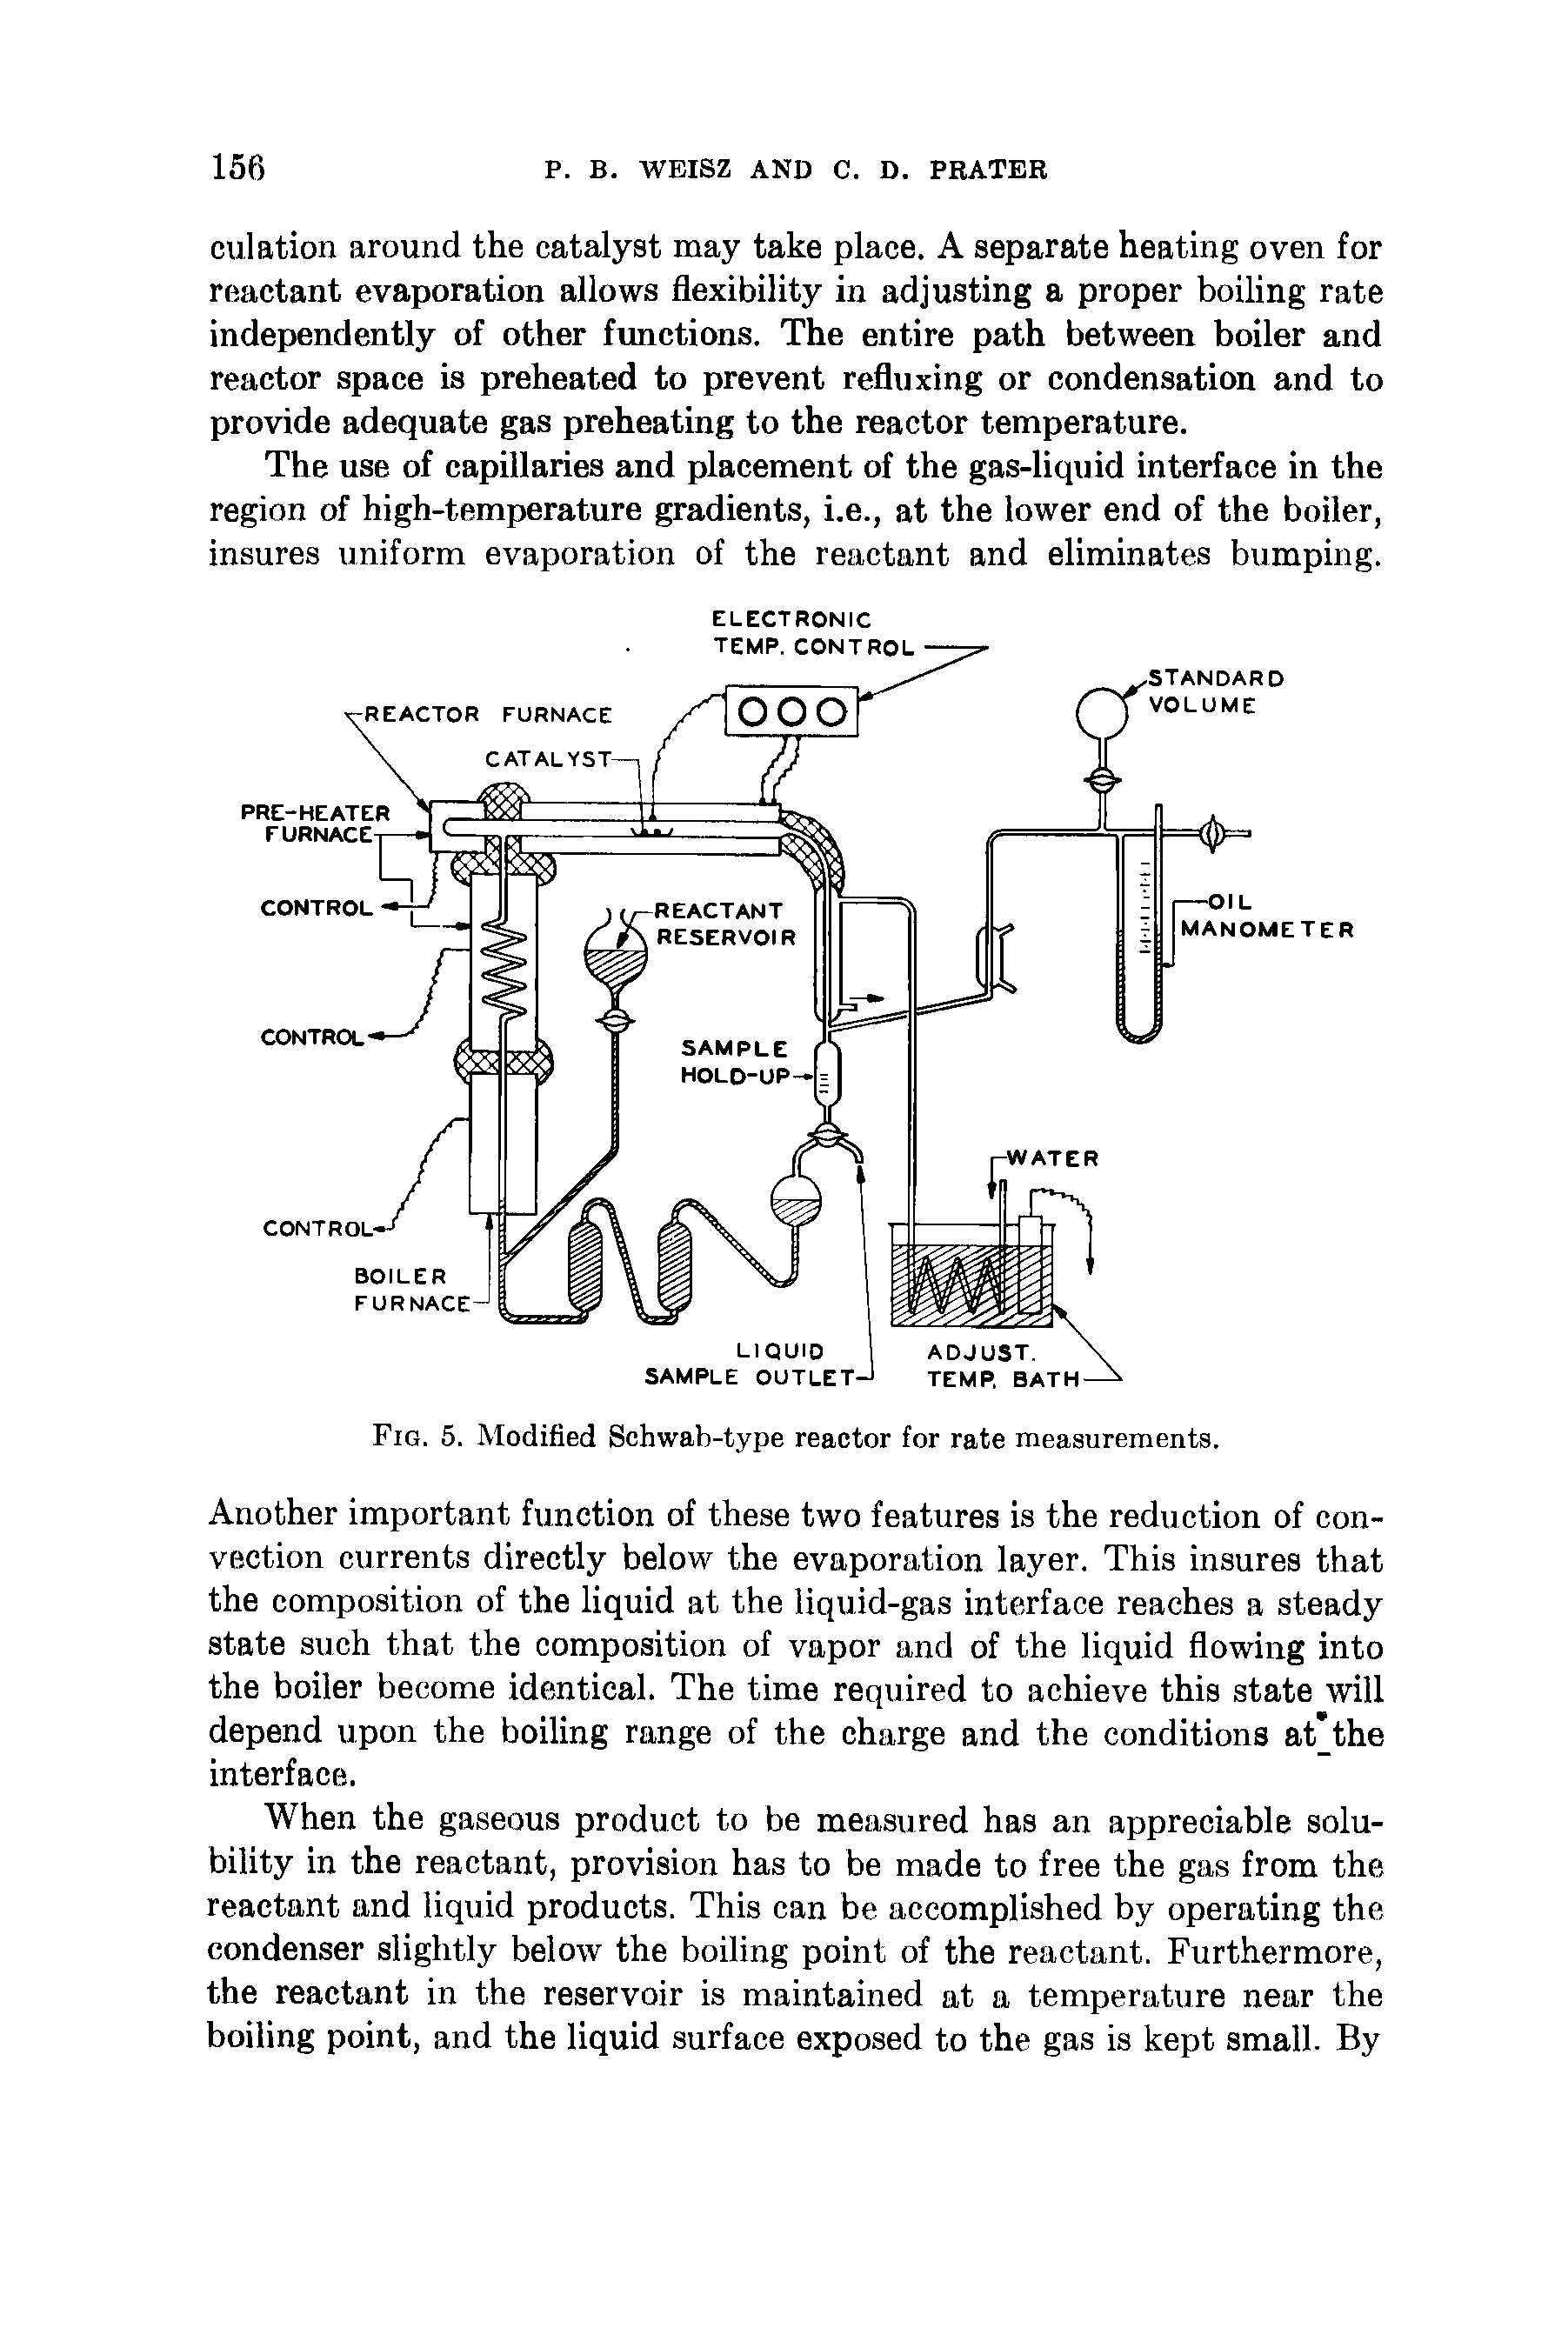 Fig. 5. Modified Schwab-type reactor for rate measurements.